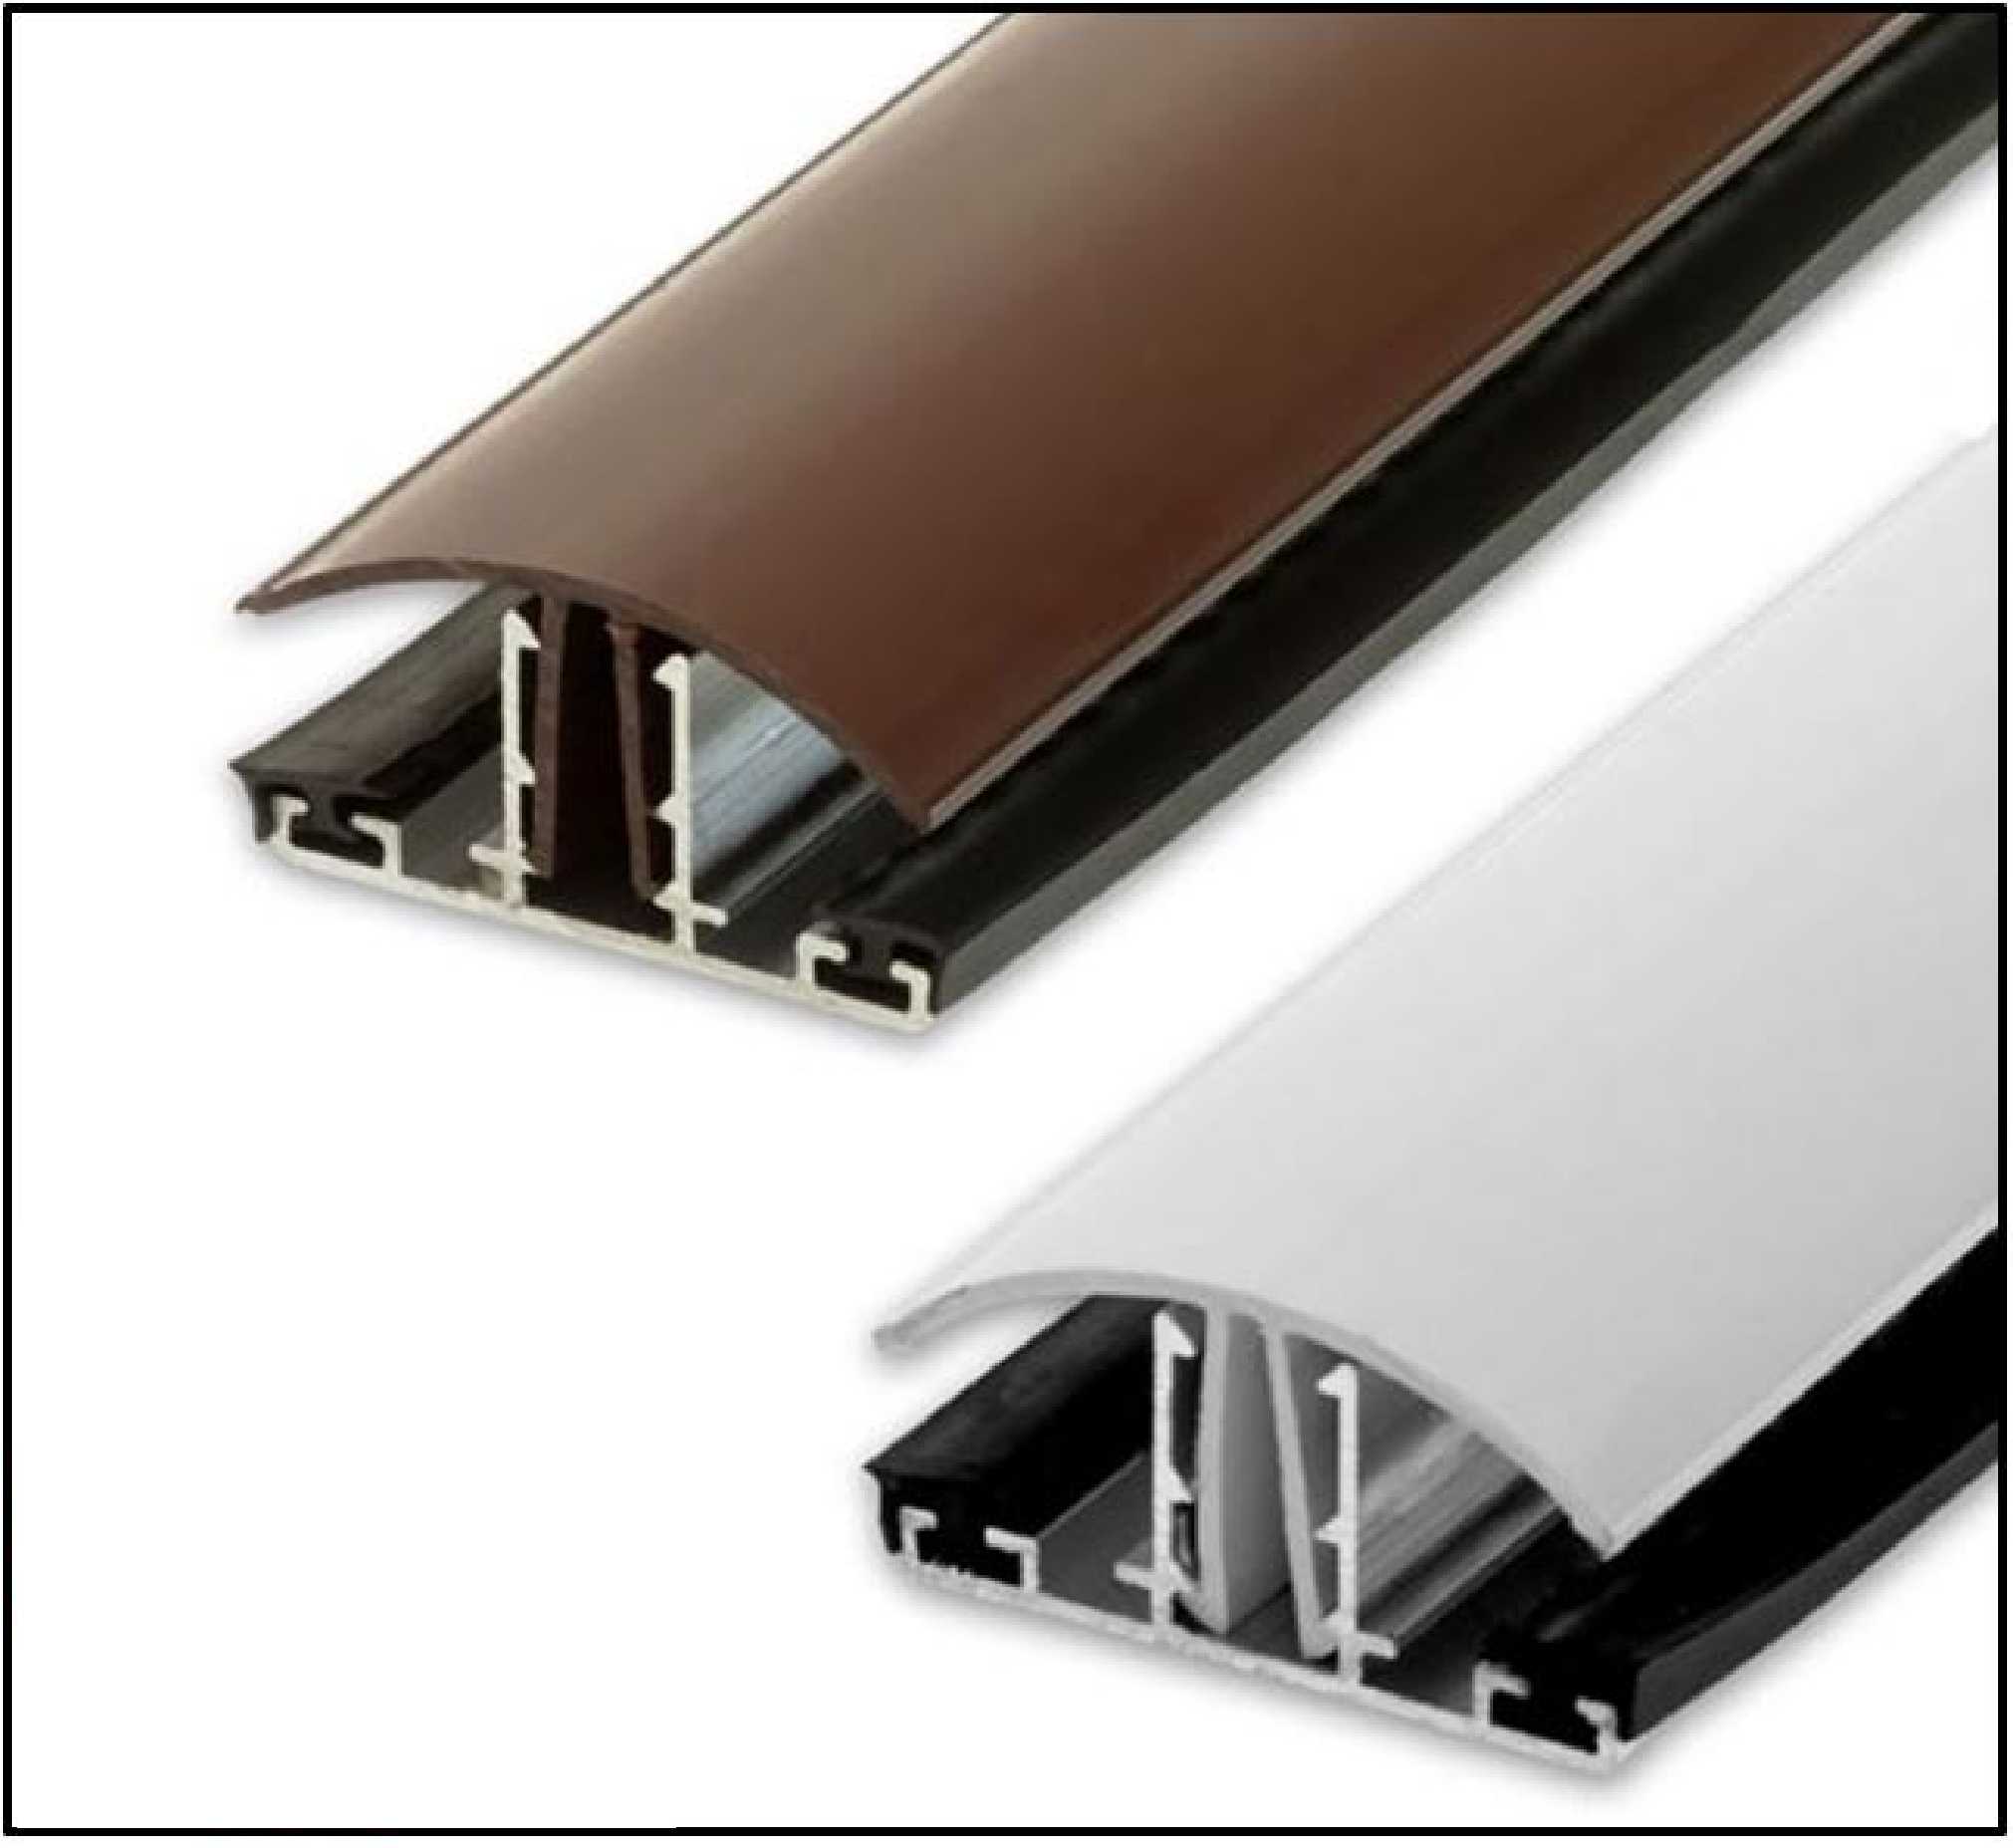 Snapfix uPVC Rafter Supported Glazing Bar for 25-35mm thick Polycarbonate Glazing, 6.0m